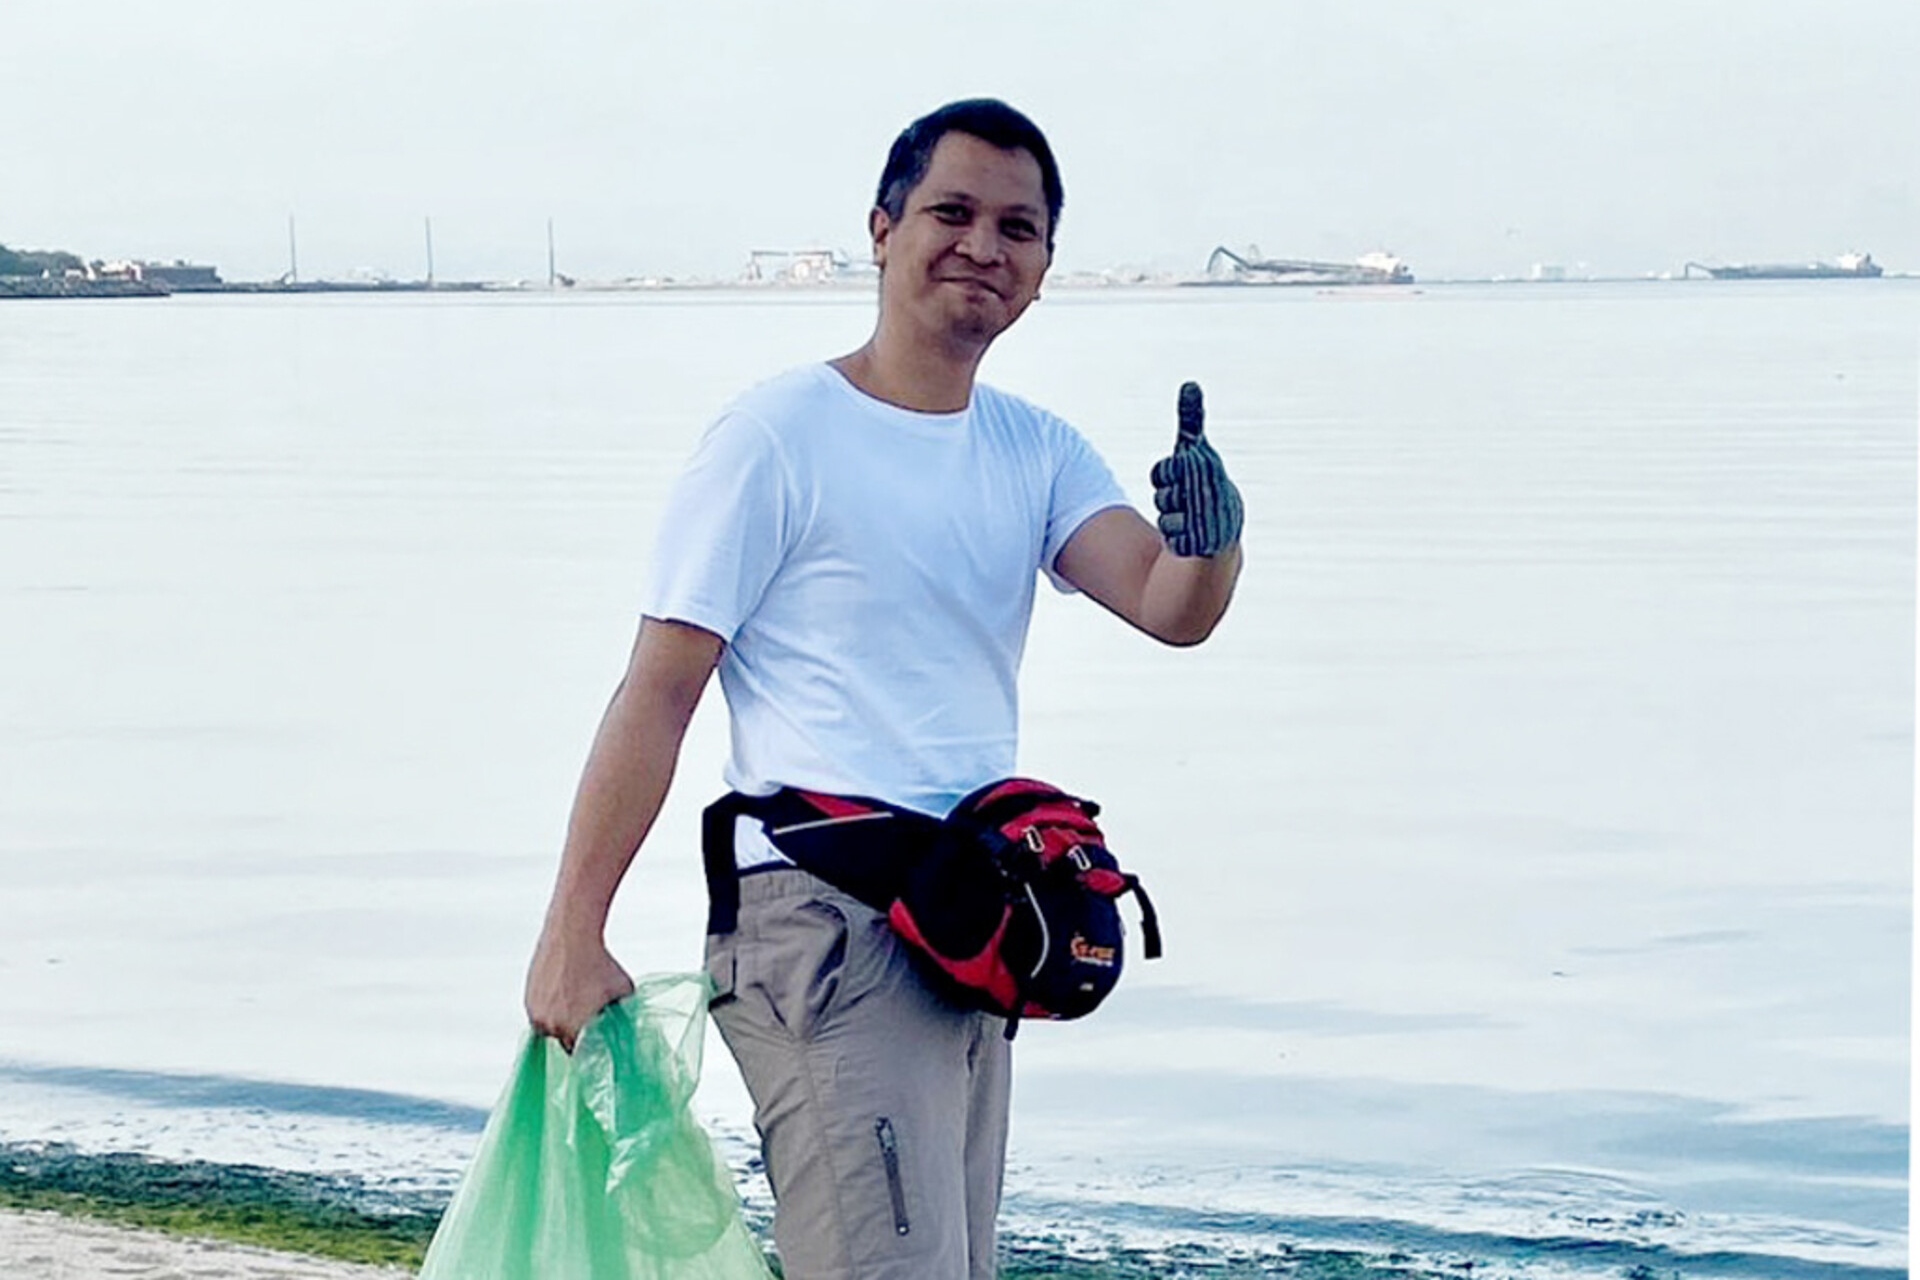 ZEISS employees in the Philippines picking up litter on earth day